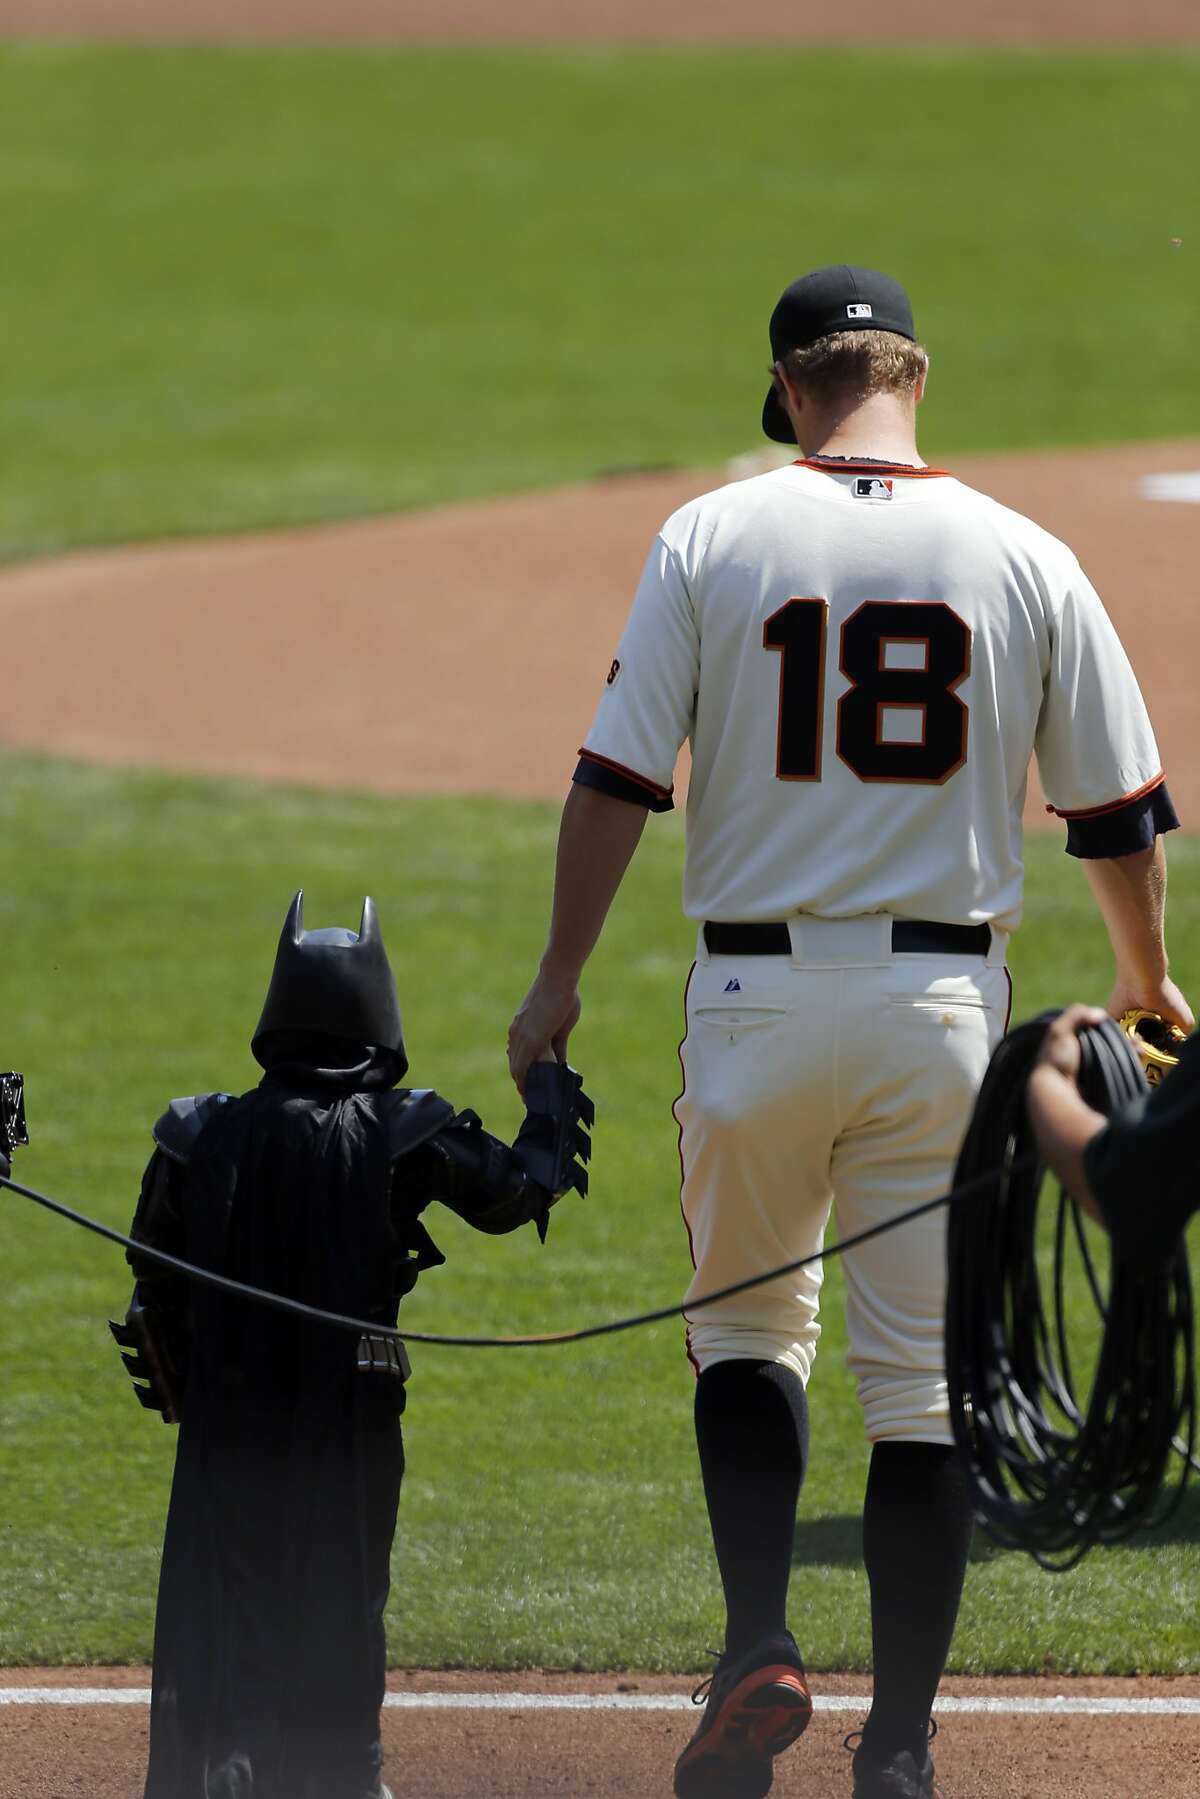 Giants pitcher Matt Cain walks Batkid to the pitcher's mound during the opening ceremonies as the San Francisco Giants prepare to take on the Arizona Diamondback during their home opener at AT&T Park on Tuesday April 8, 2014, in San Francisco, Calif.